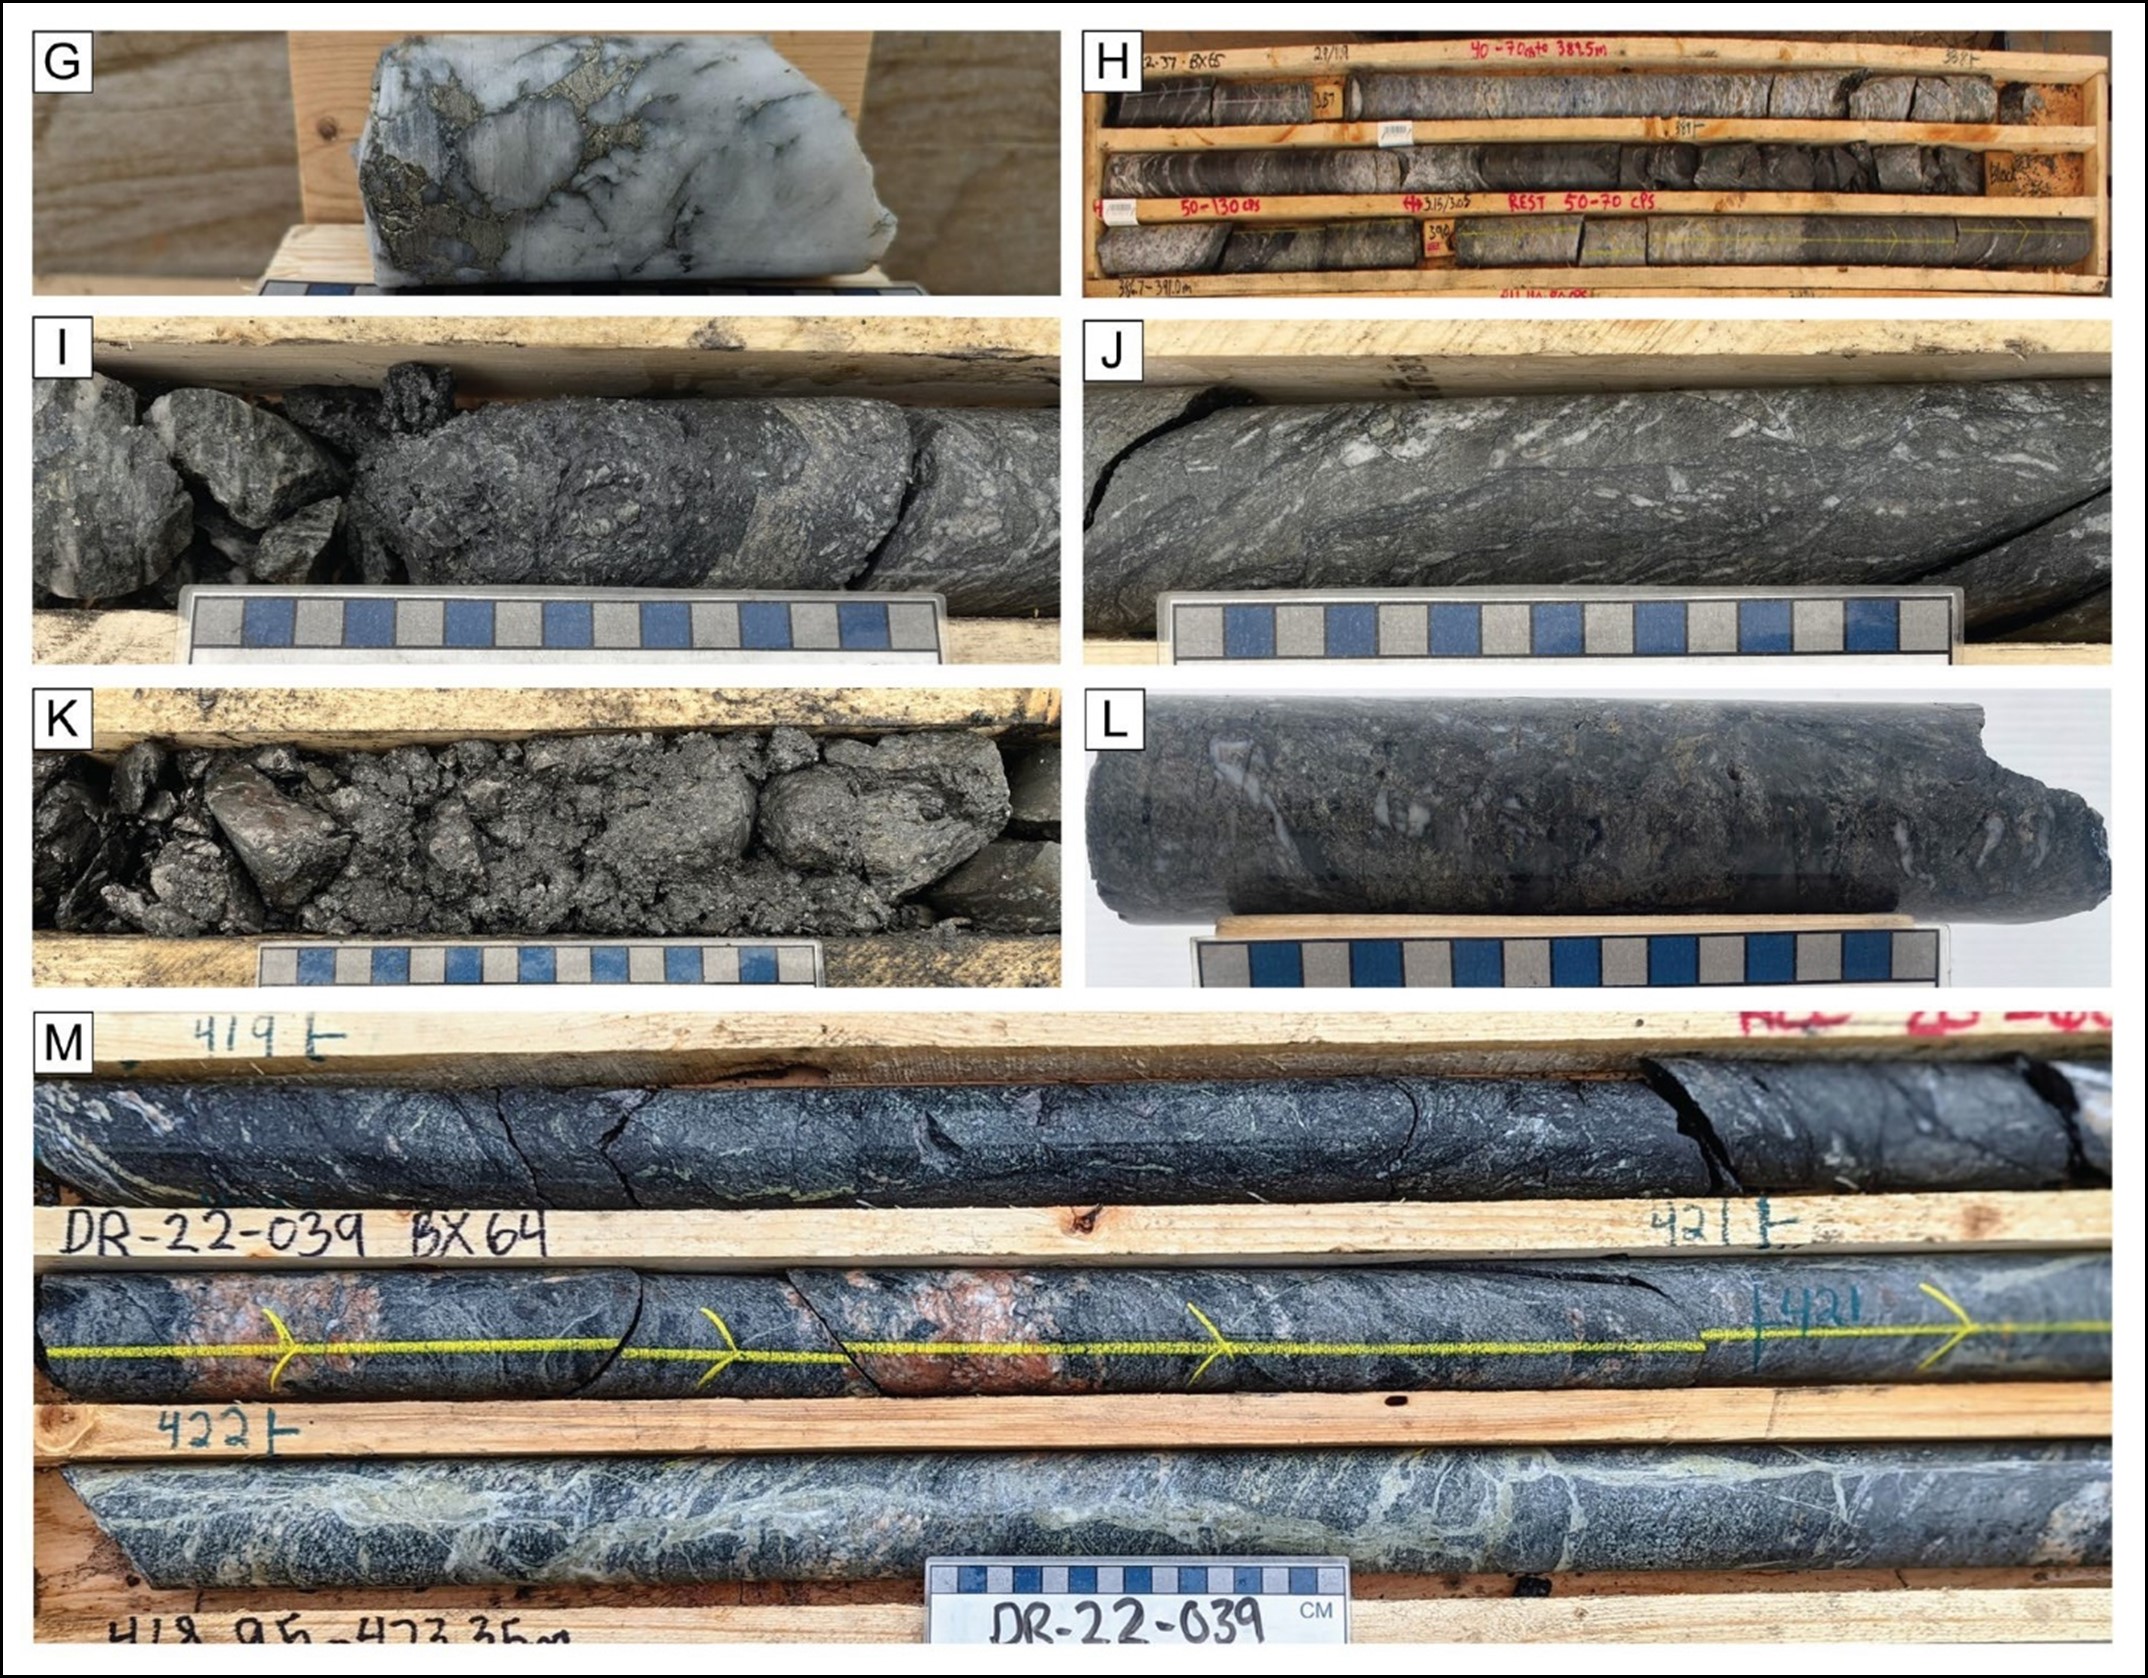 Core photos of structural zones from the Phase III summer drill program. G)sulphide-rich quartz veining proximal to significant shear zone in DR-22-036 hosting anomalous Co, Cu, and Mo. H) Graphitic shear with anomalous U, Mo, and Cu in DR-22-037. I&J) Strong graphitic cataclastic shear in DR-22-037. K) Graphitic clay-altered shear zone in DR-22-038 with5.87 ppm U. L) Anomalous B, Co, and Cu within a brittle reactivated graphitic shear zone. M) Brecciated graphitic high strain zone in DR-22-039.